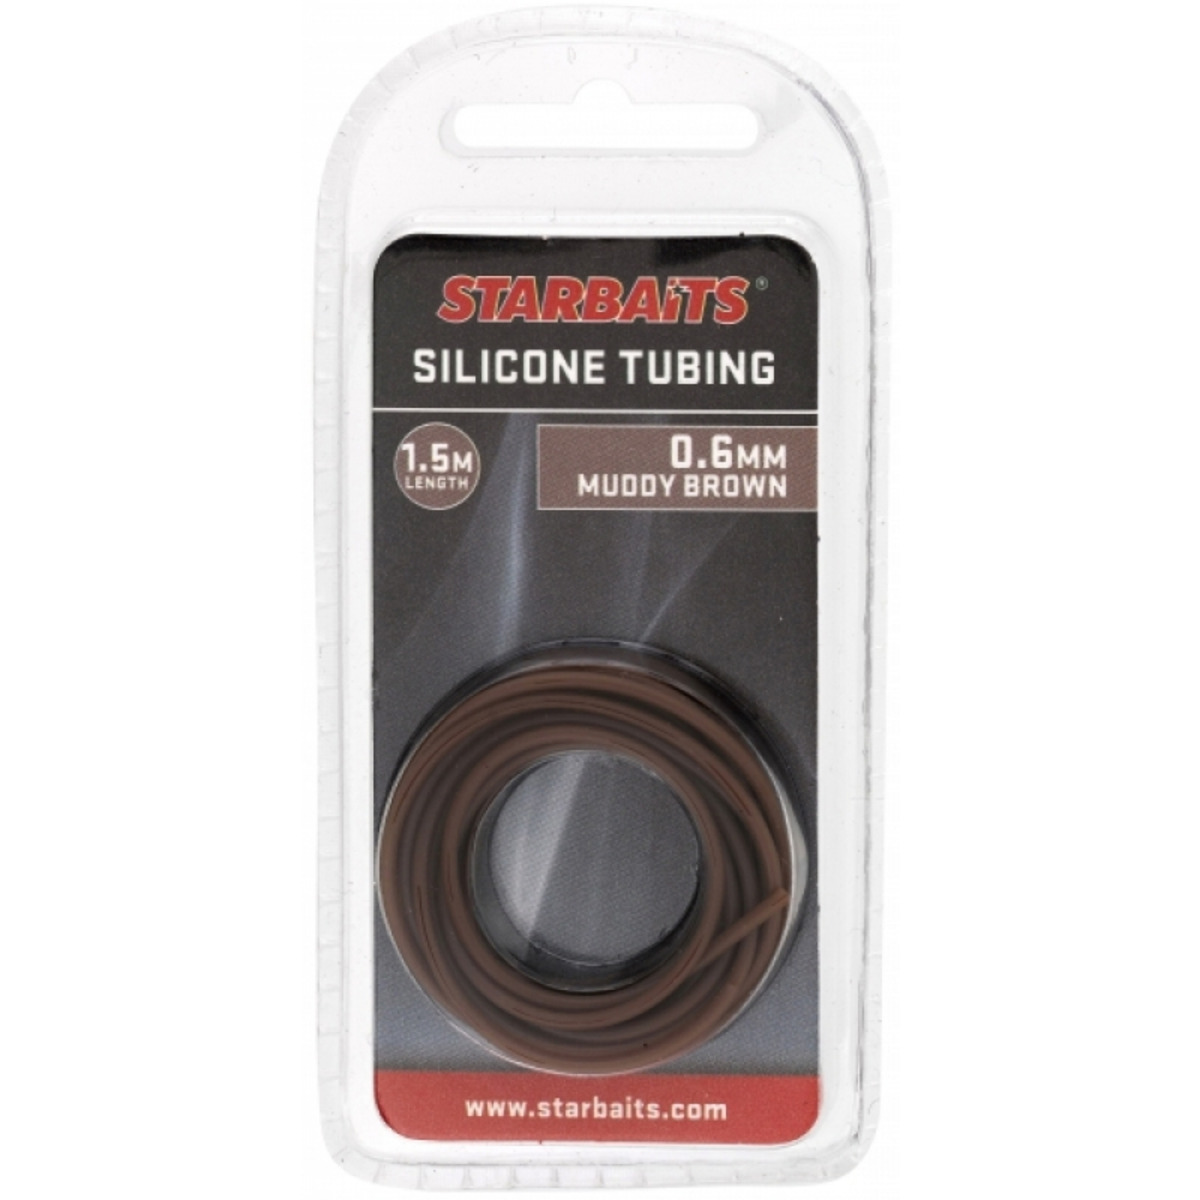 Starbaits Tubing 0.6mm Silicone - MUDDY BROWN